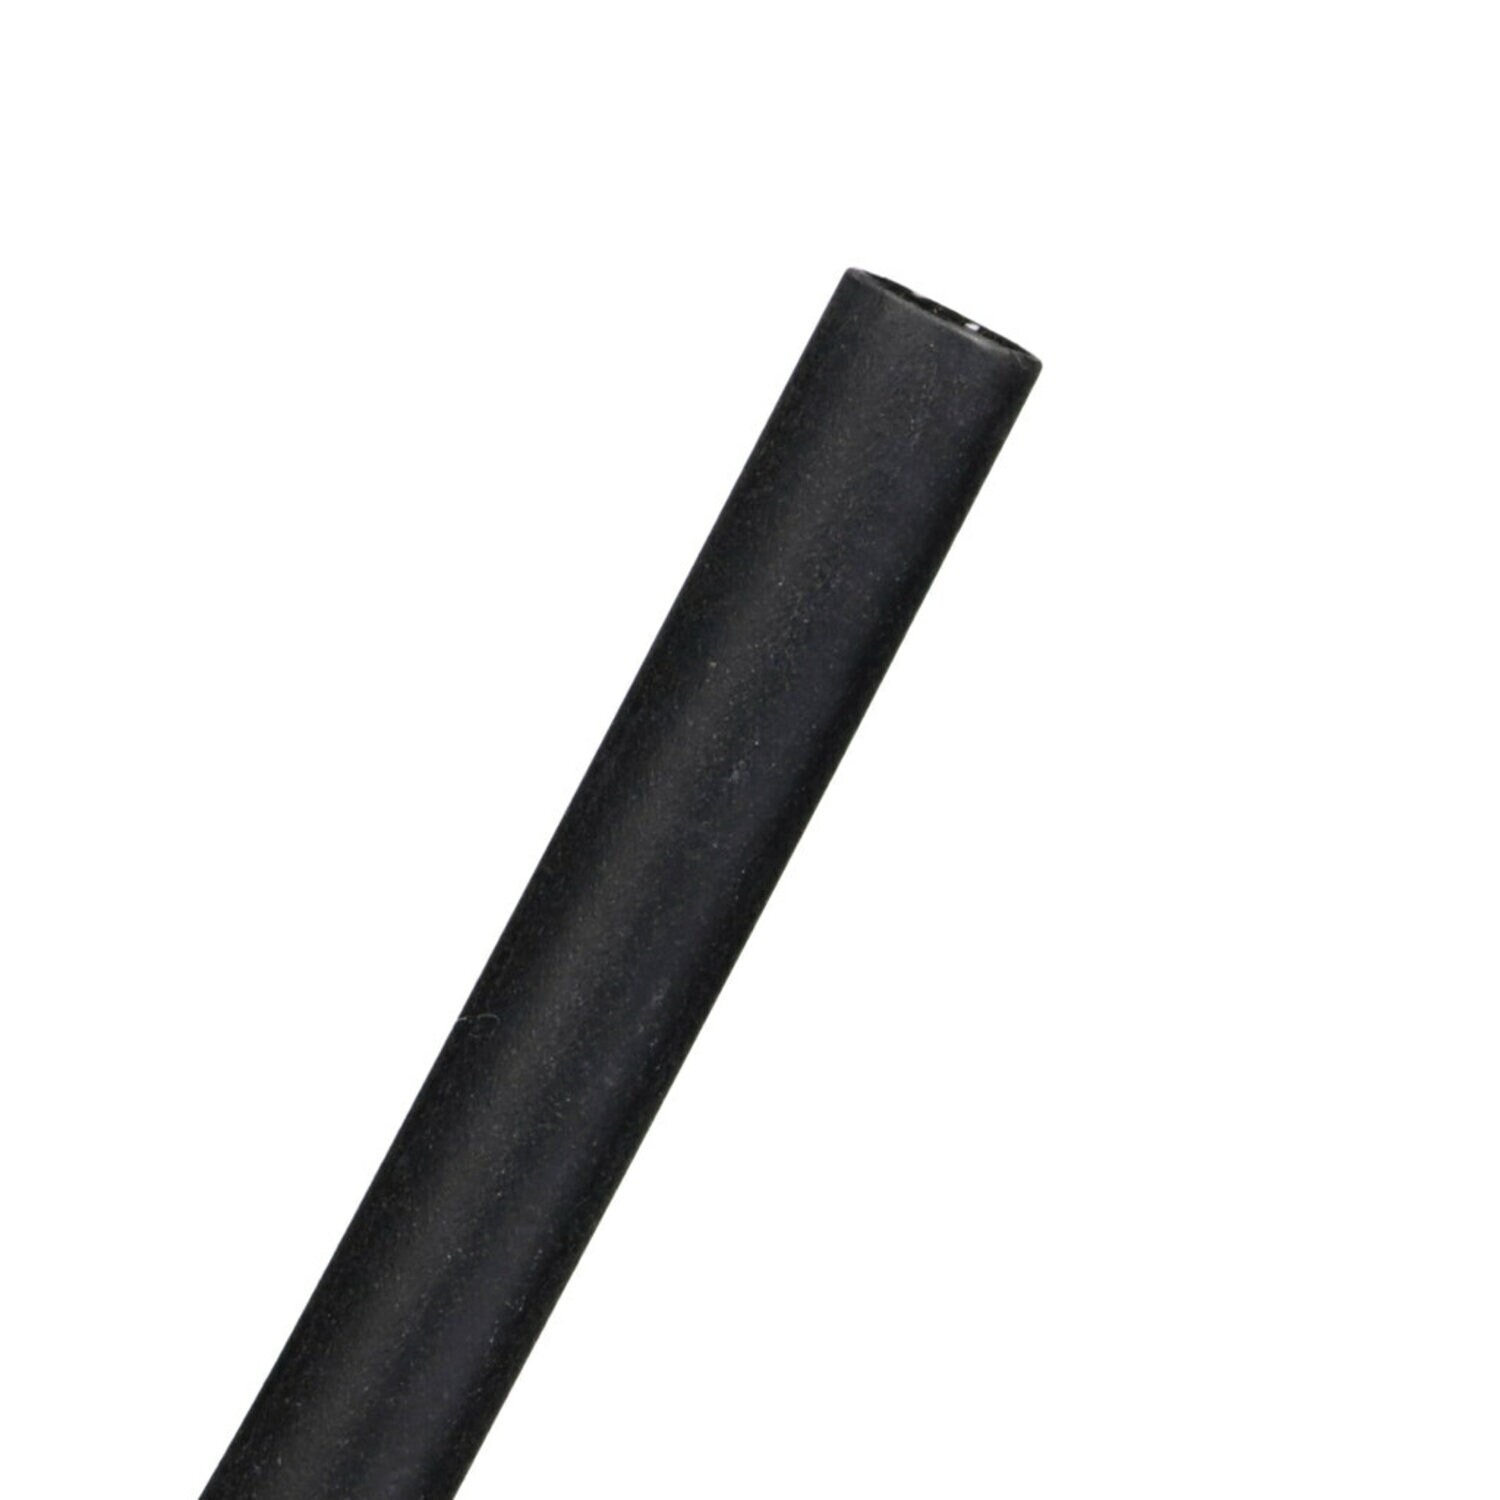 7000133613 - 3M Thin-Wall Heat Shrink Tubing EPS-300, Adhesive-Lined,
3/16-48"-Black-250 Pcs, 48 in length sticks, 250 pieces/case